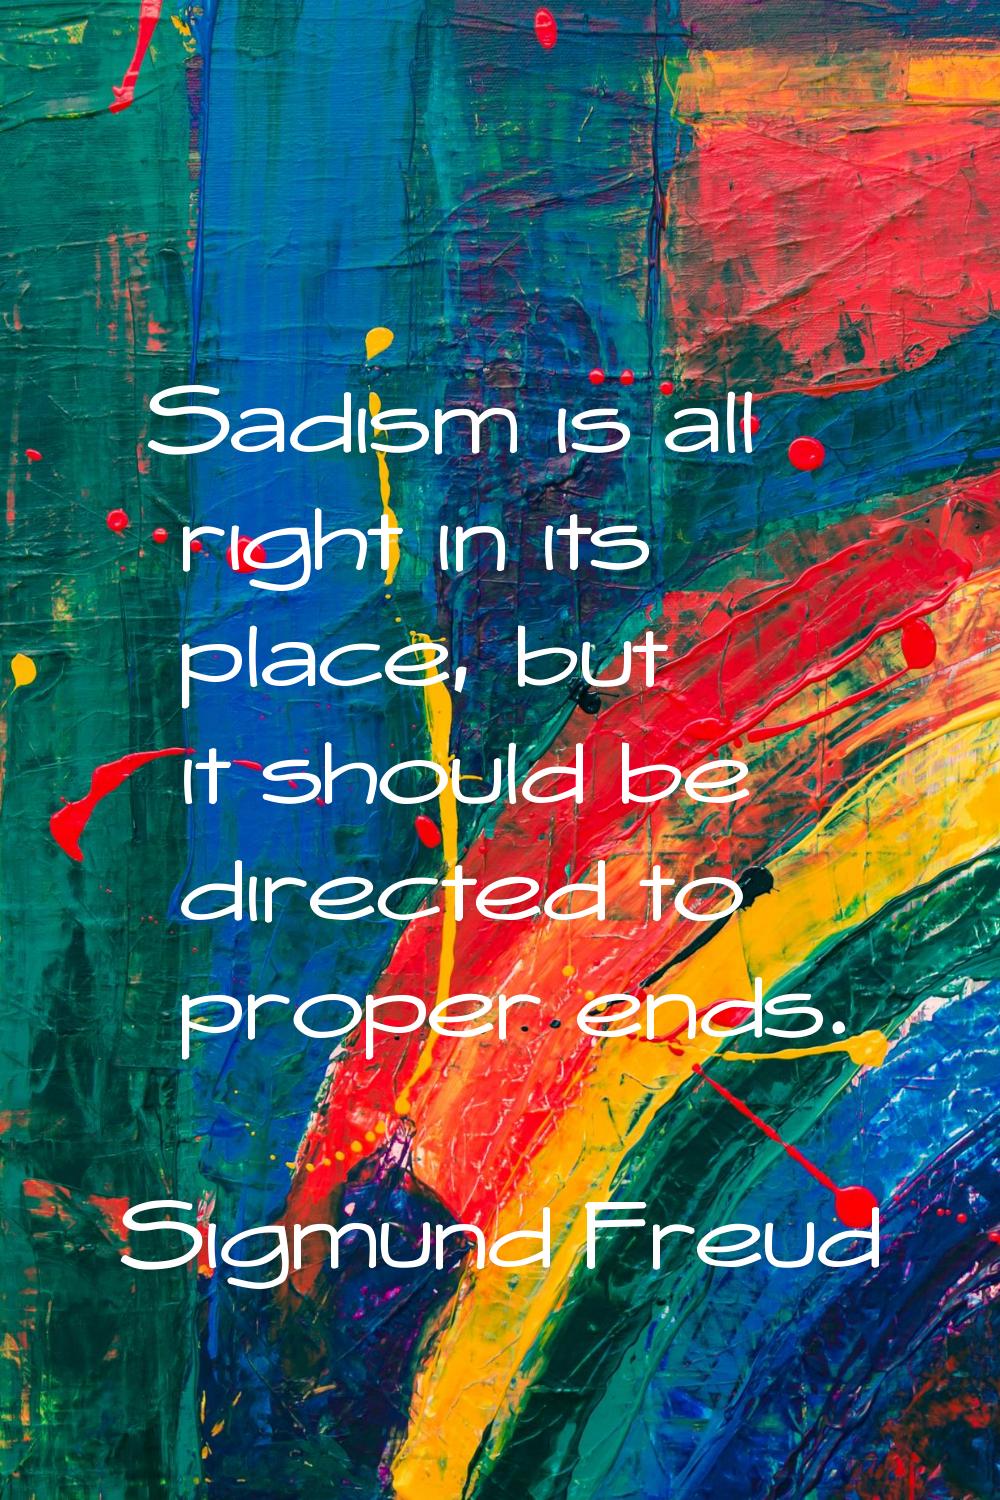 Sadism is all right in its place, but it should be directed to proper ends.